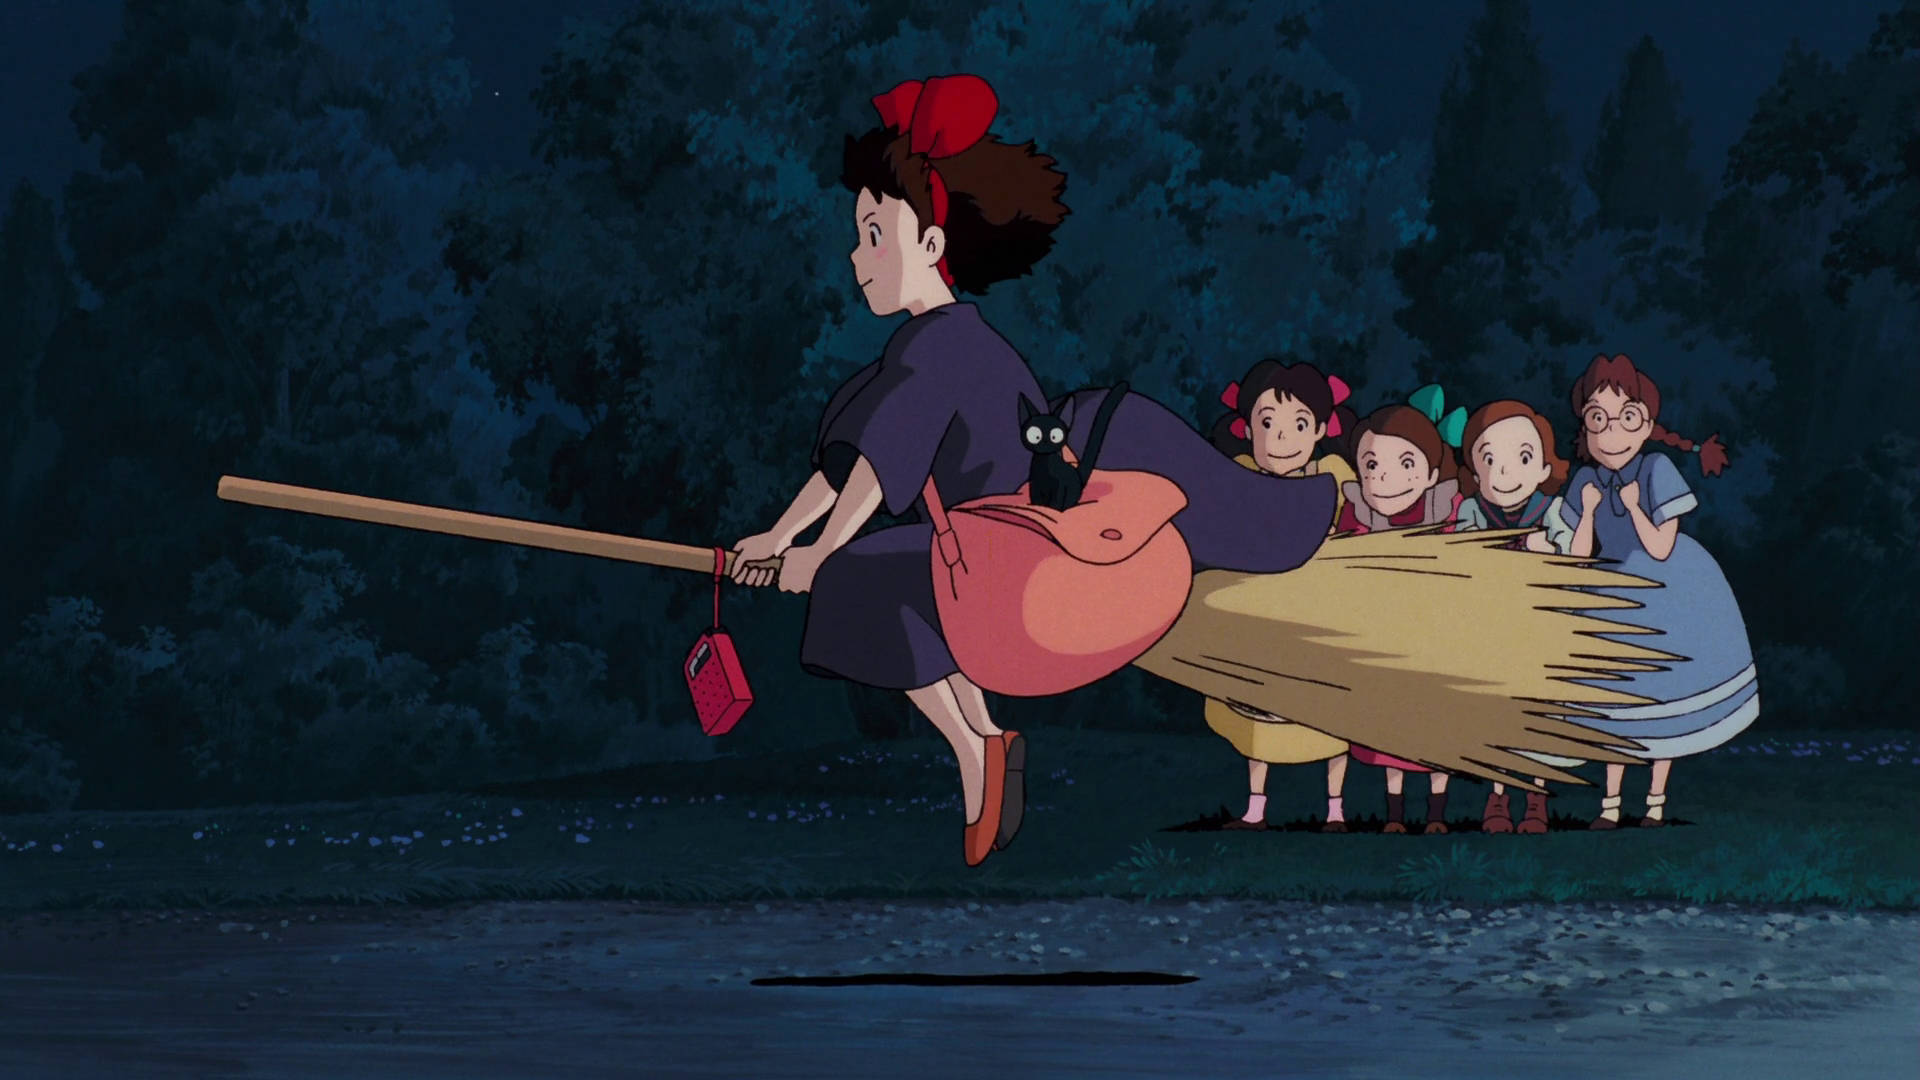 Kiki's Flight From Kikis Delivery Service Background